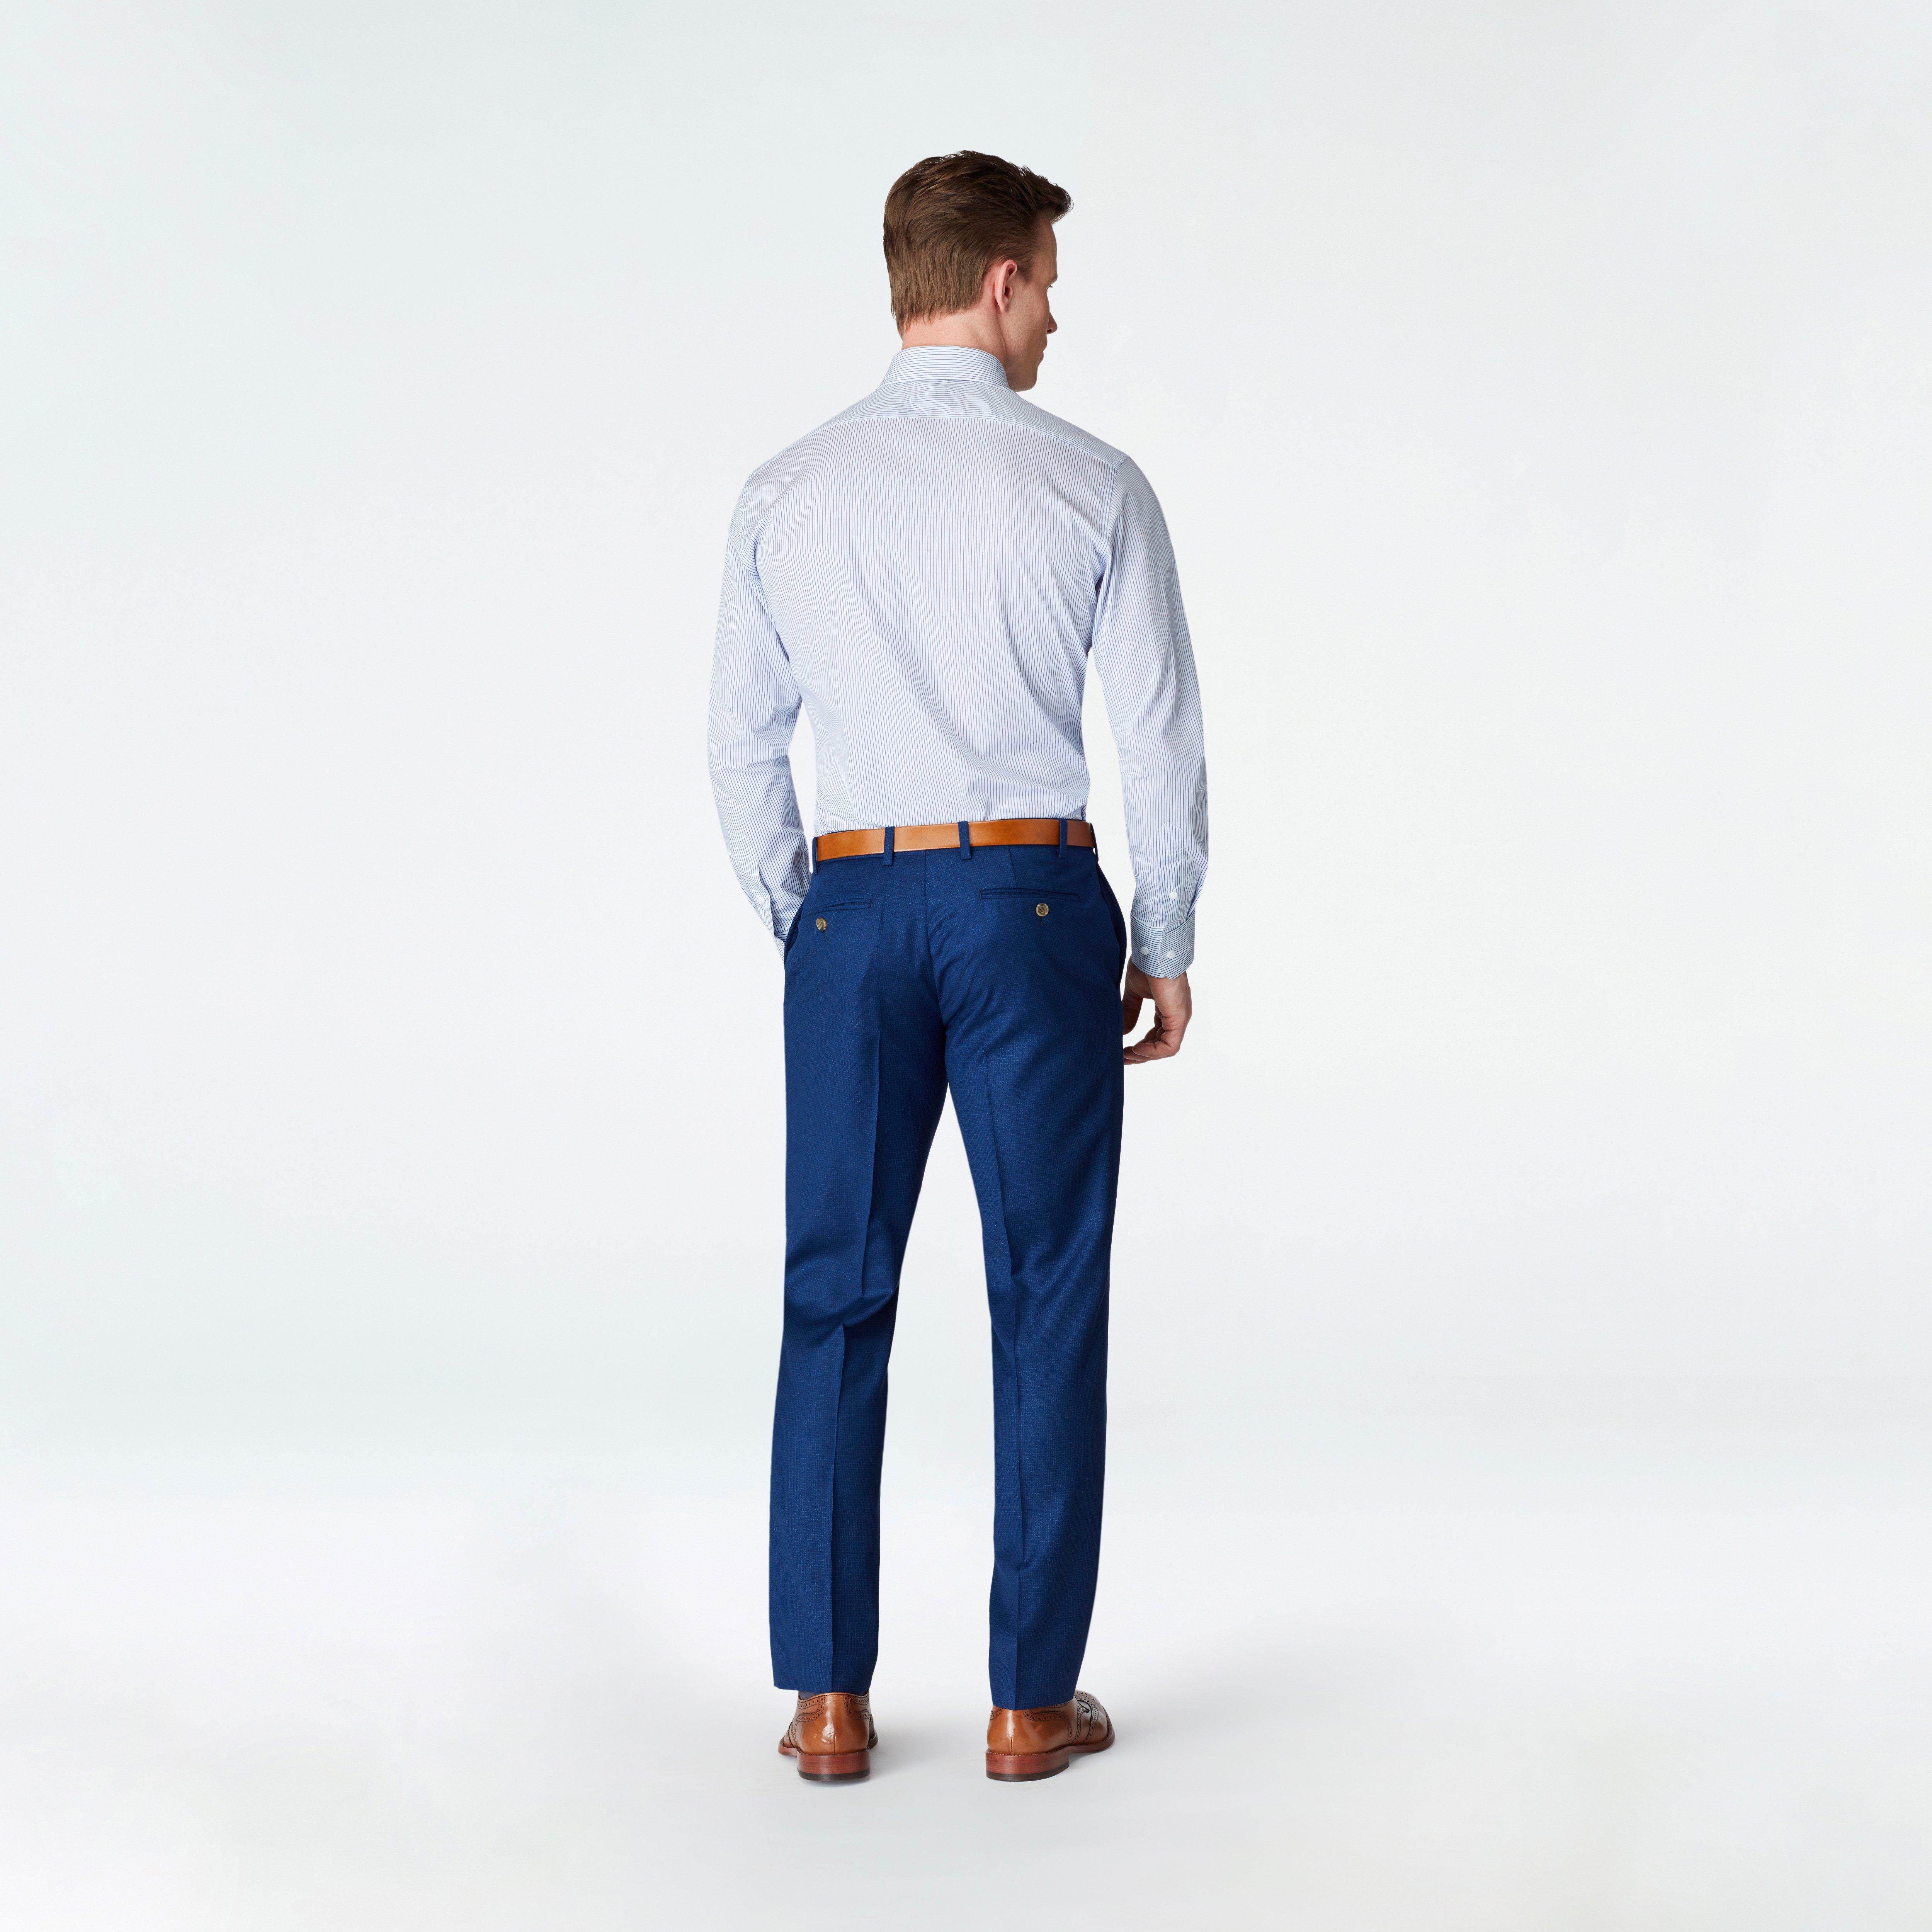 Chiswick Micro Check Navy Suit